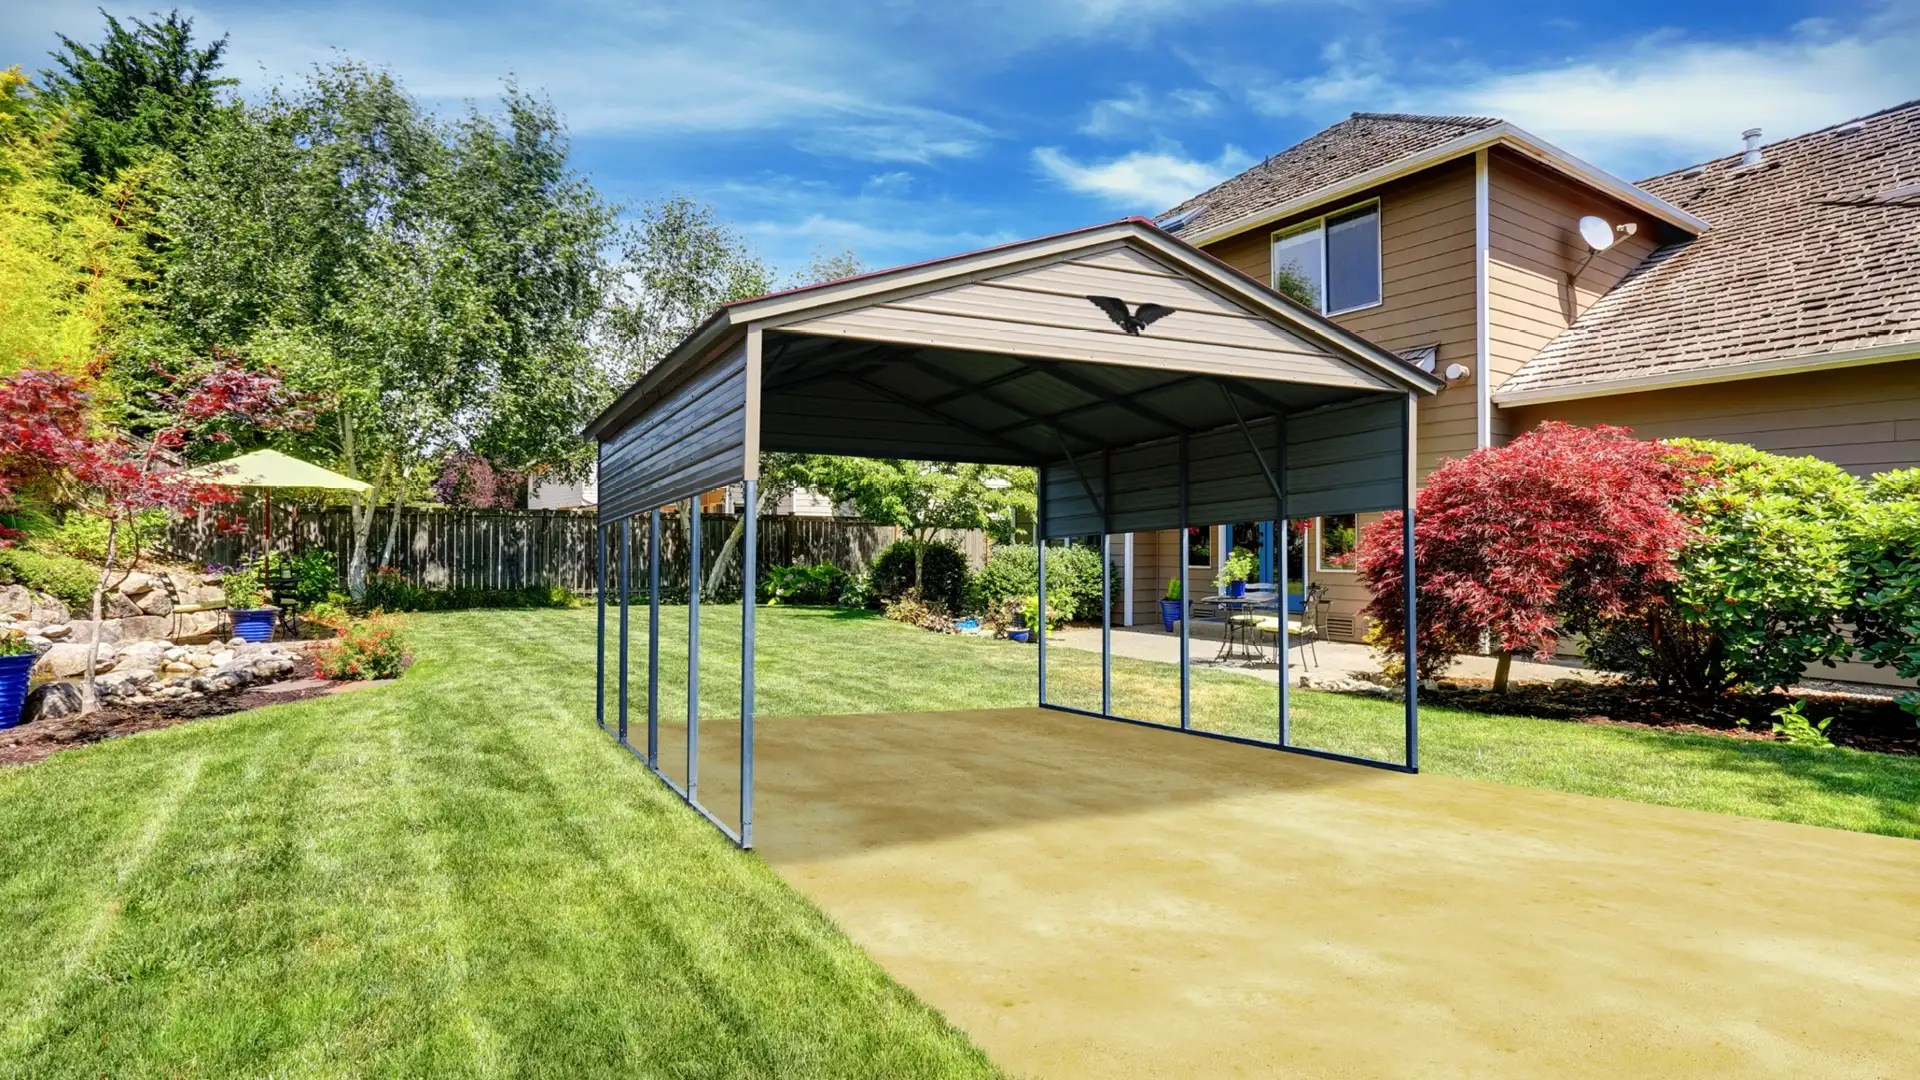 Tan metal carport sitting beside a fancy house with flowerbeds and shrubbery.